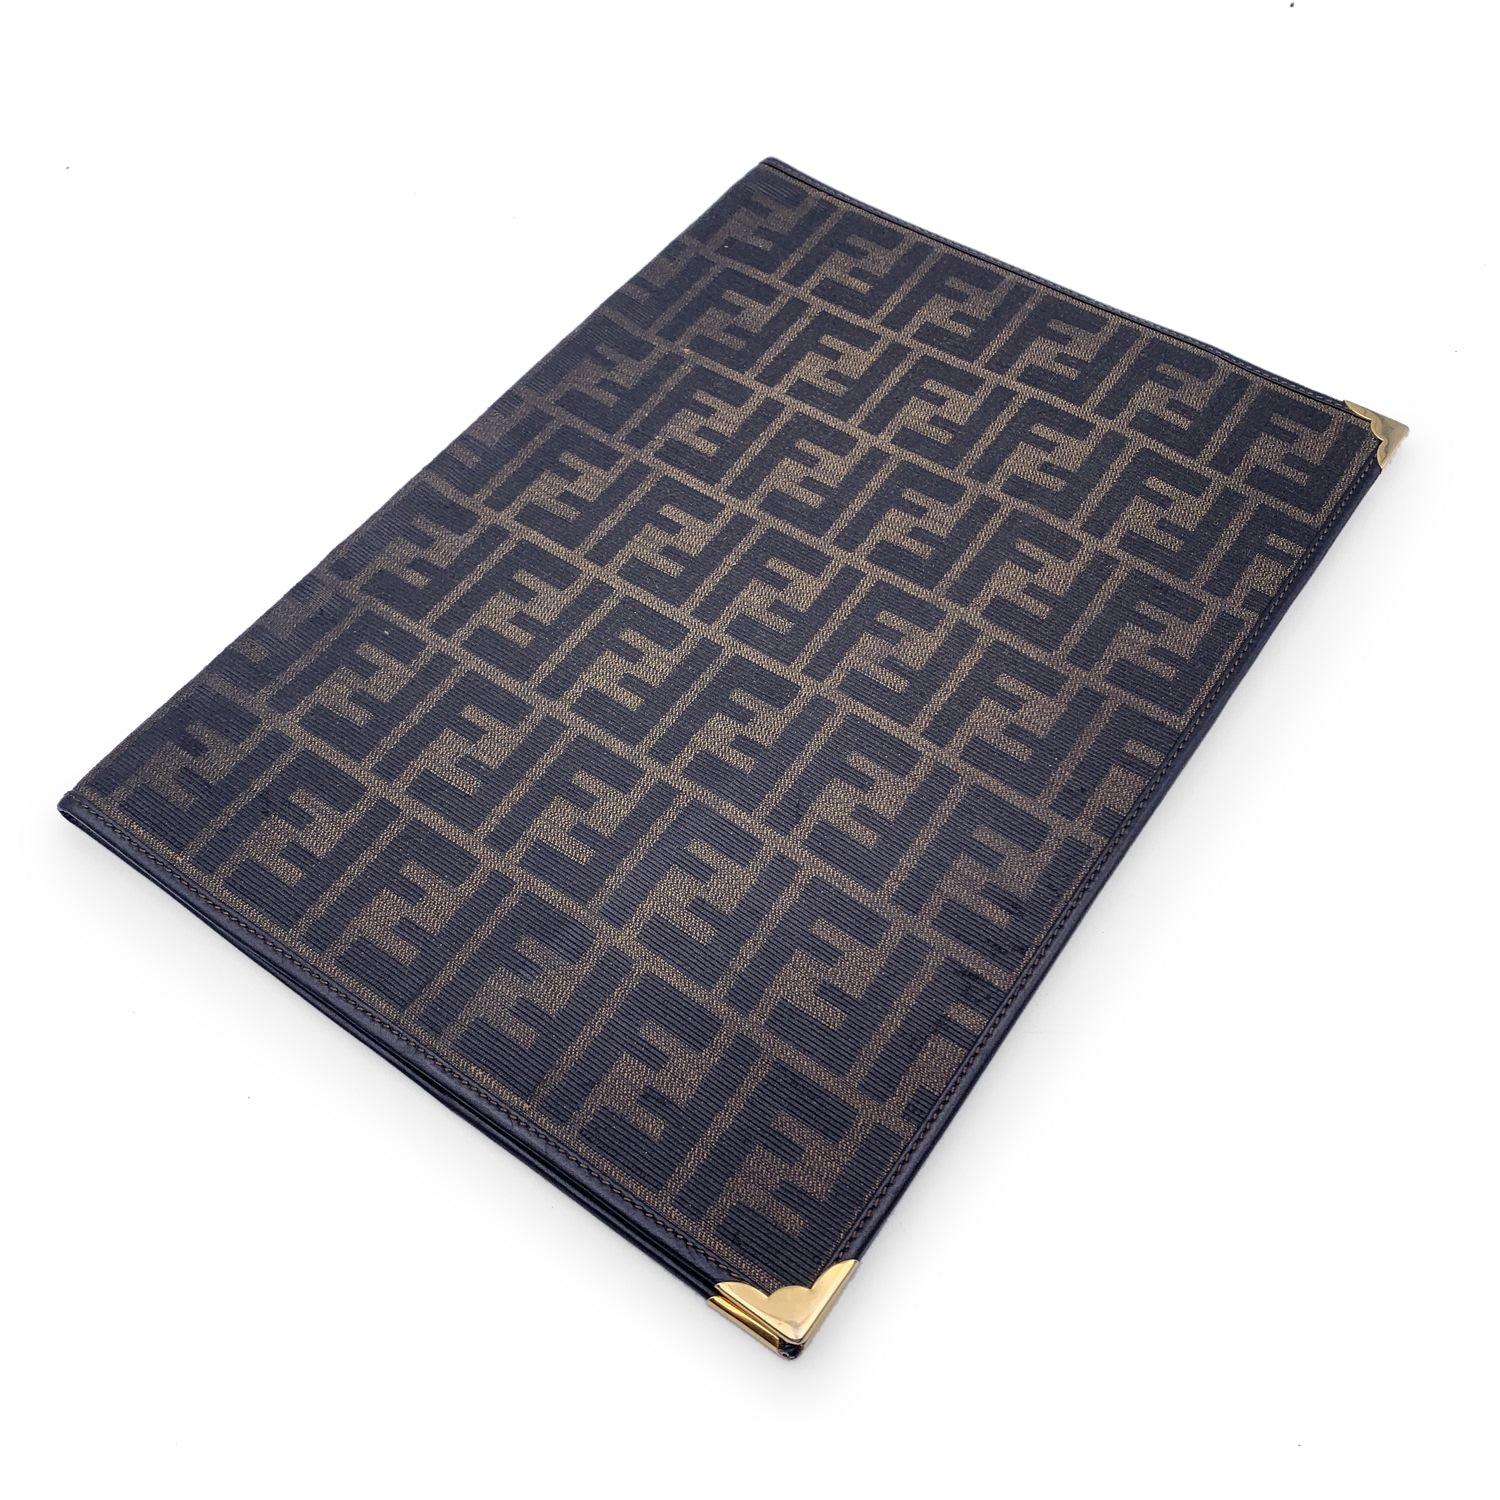 Vintage Agenda/Notebook cover by FENDI crafted in monogram Zucca canvas. Gold metal corners. Black leather interior. 'Fendi s.a.s. Roma - Made in Italy' embossed inside Details MATERIAL: Cloth COLOR: Brown MODEL: n.a. GENDER: Unisex Adults COUNTRY